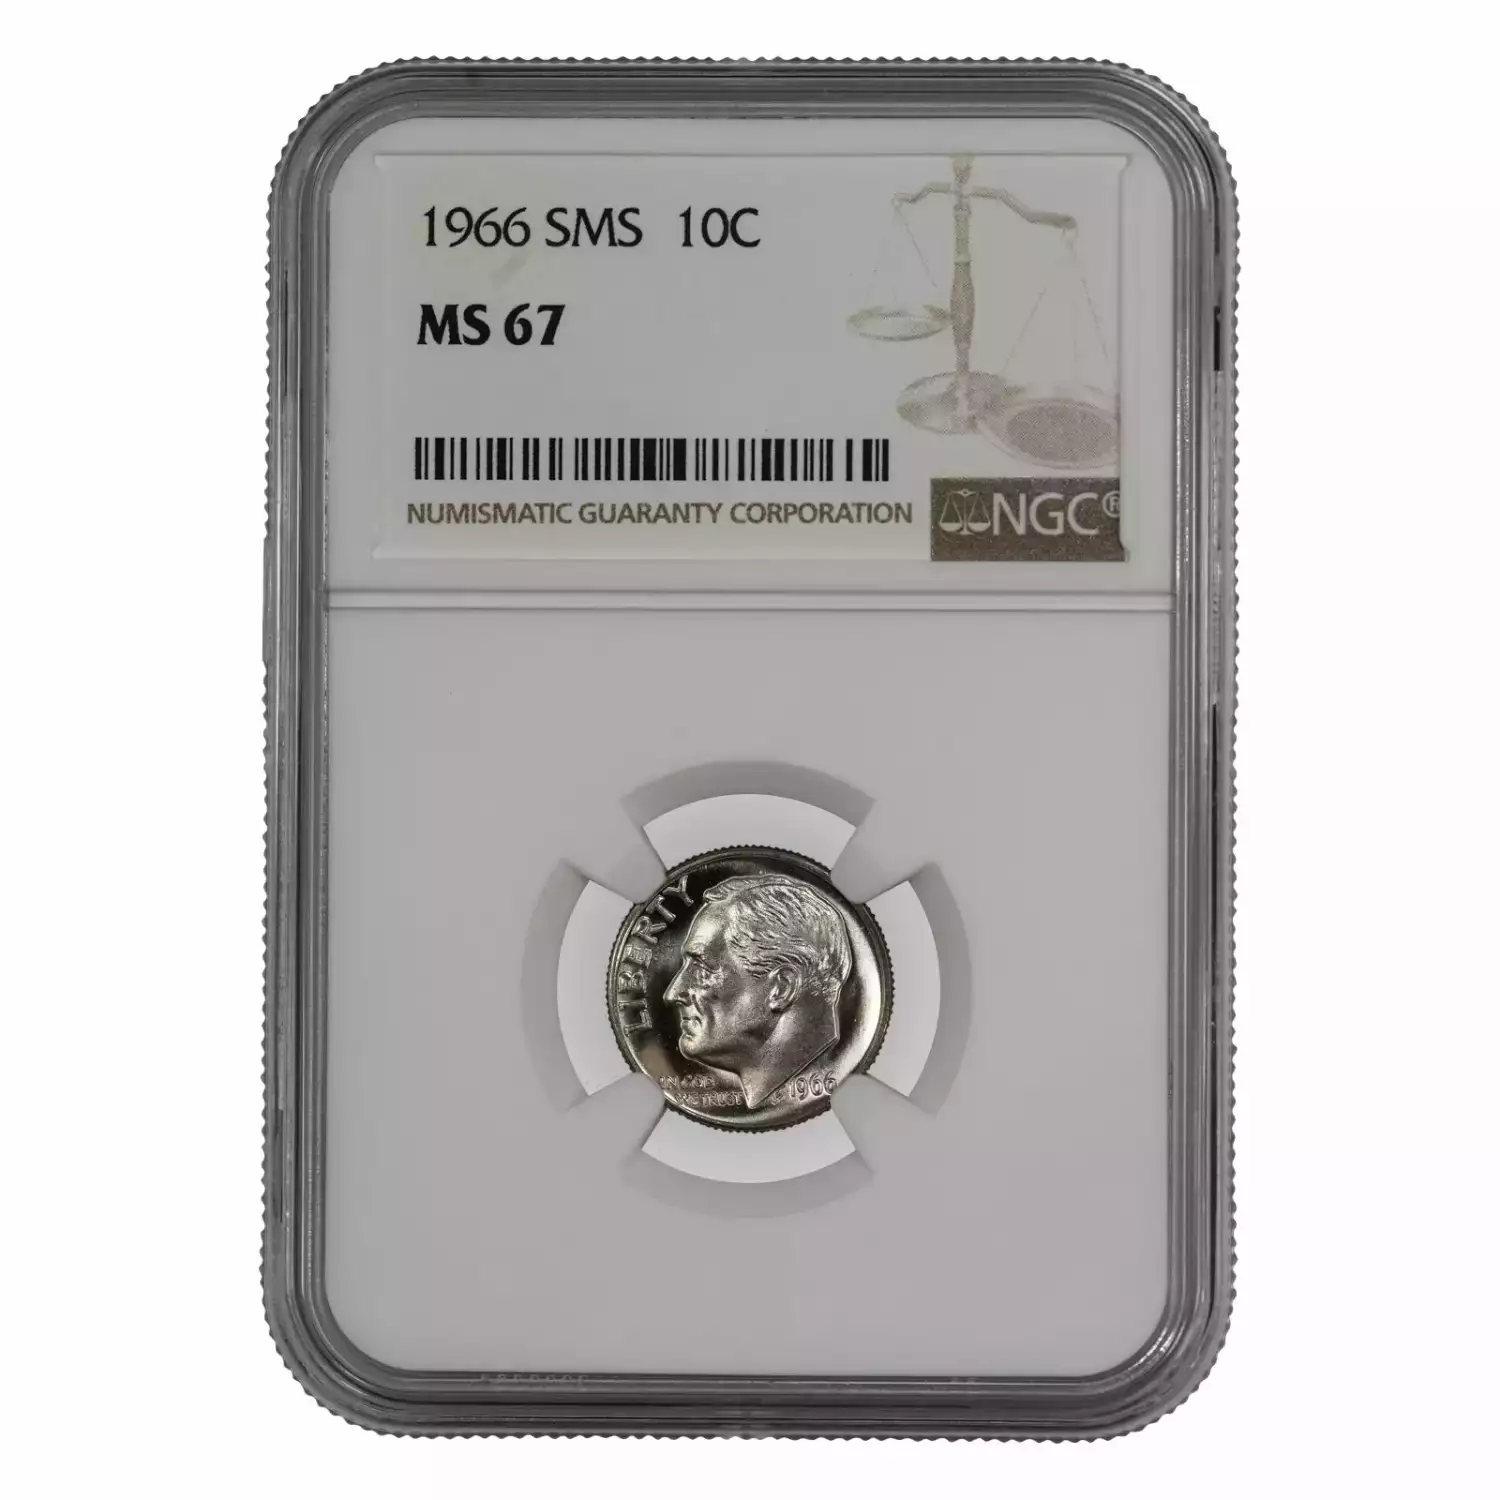 1966 SMS ROOSEVELT DIME 10C NGC CERTIFIED MS 67